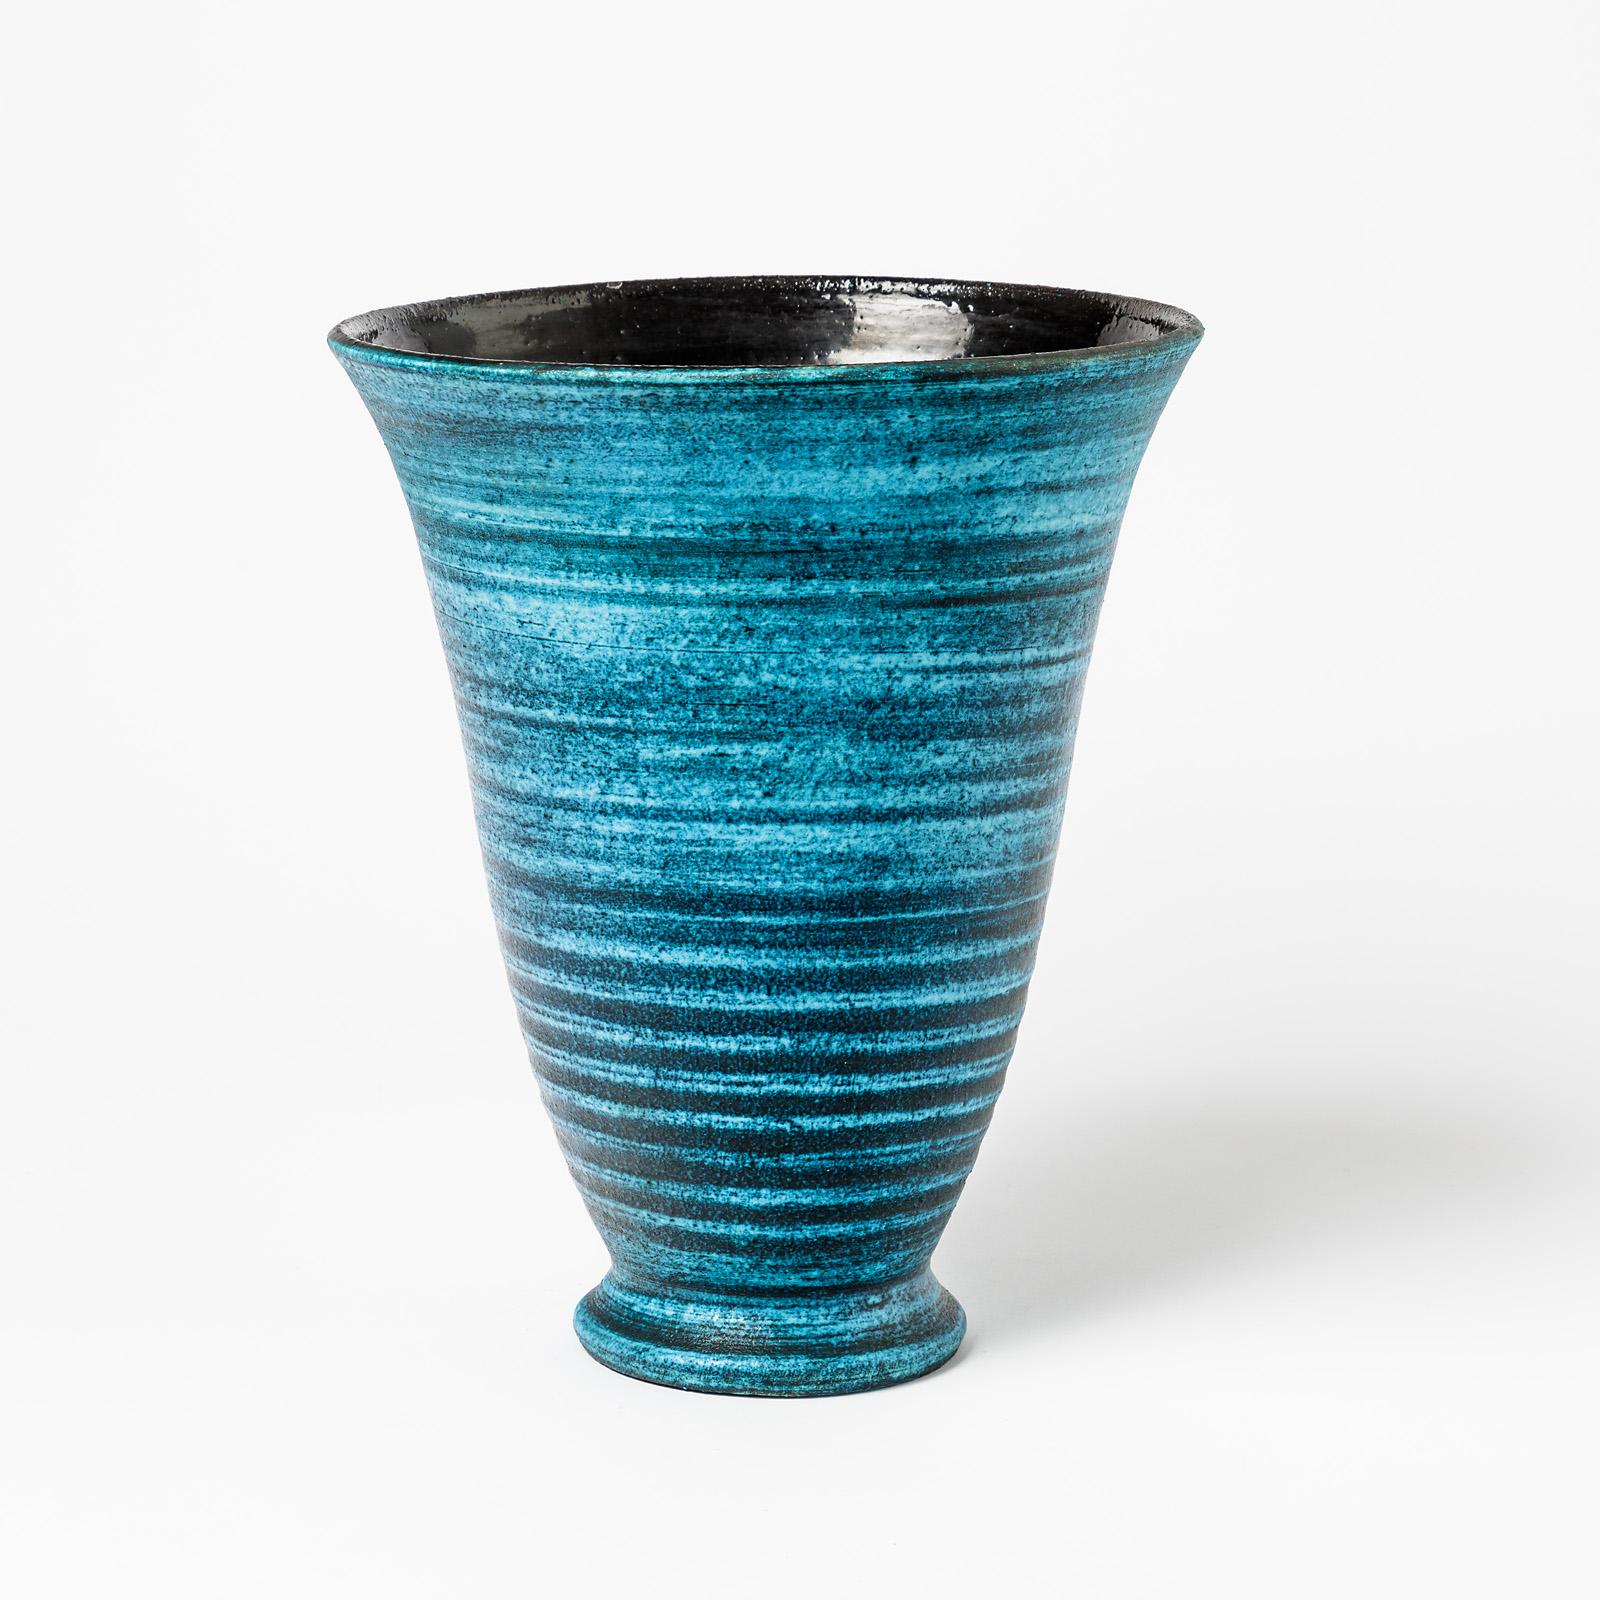 Beaux Arts Ceramic Vase with Blue Glaze Decoration by Accolay, circa 1960-1970 For Sale